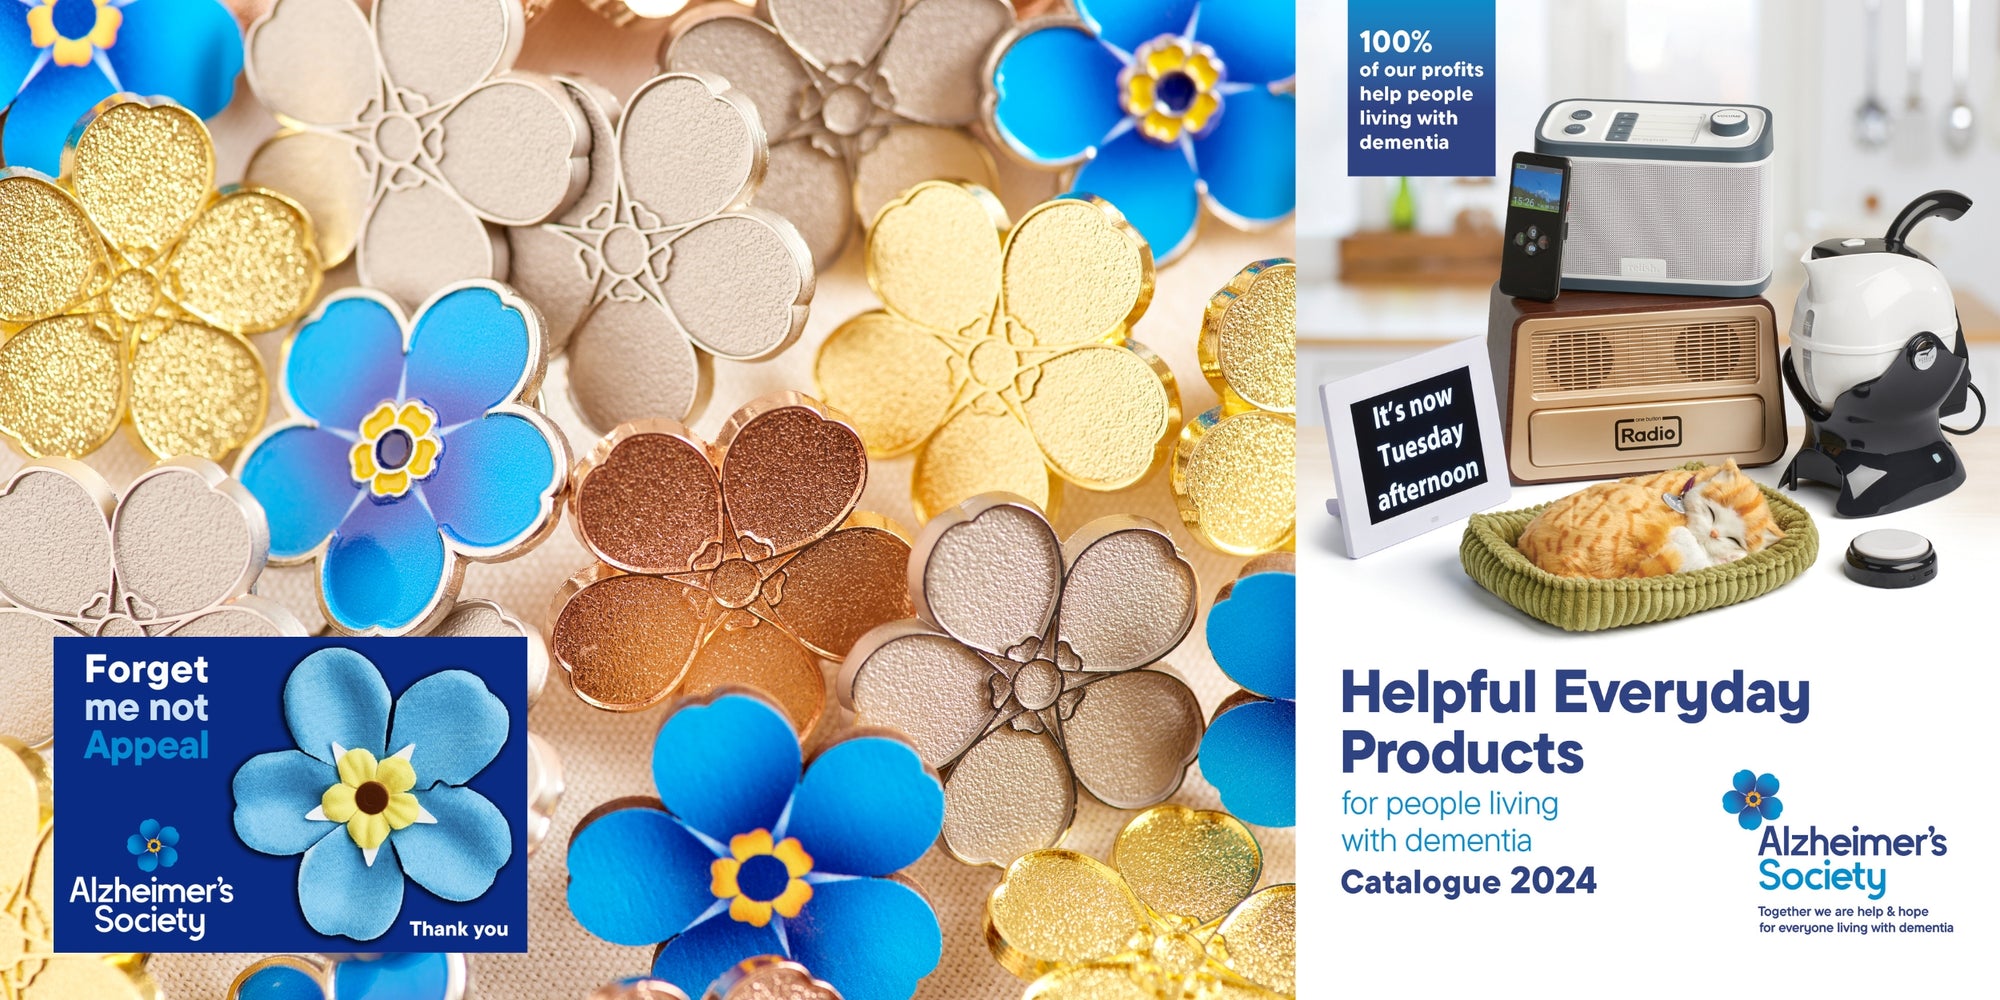 Different types of forget-me-not pin badges to shop your support